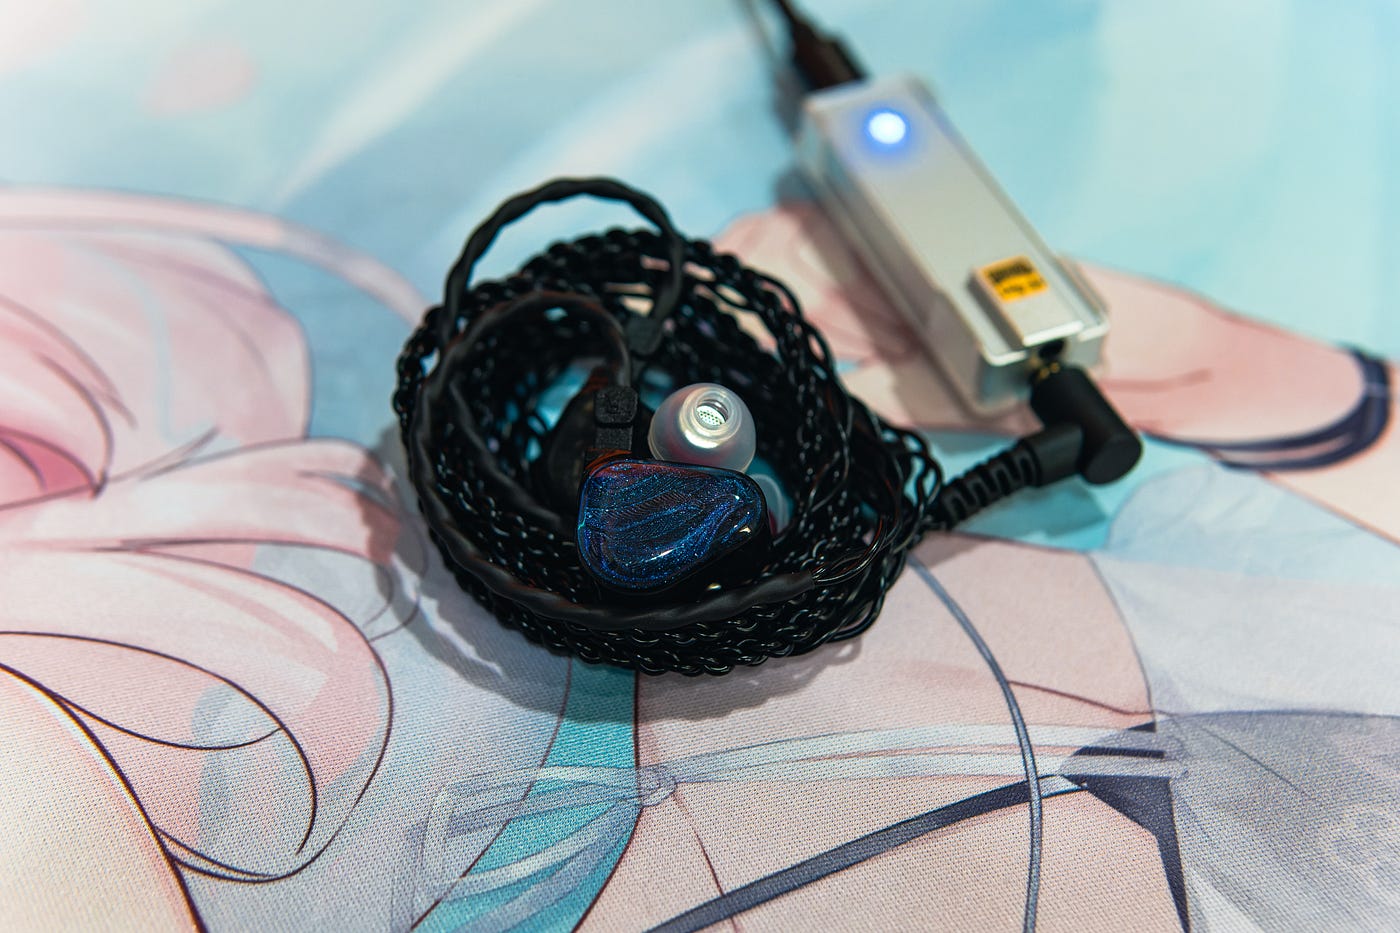 Truthear x Crinacle ZERO In-Ear Monitors Review - Two Dynamic Drivers, One  Harman Tuning!